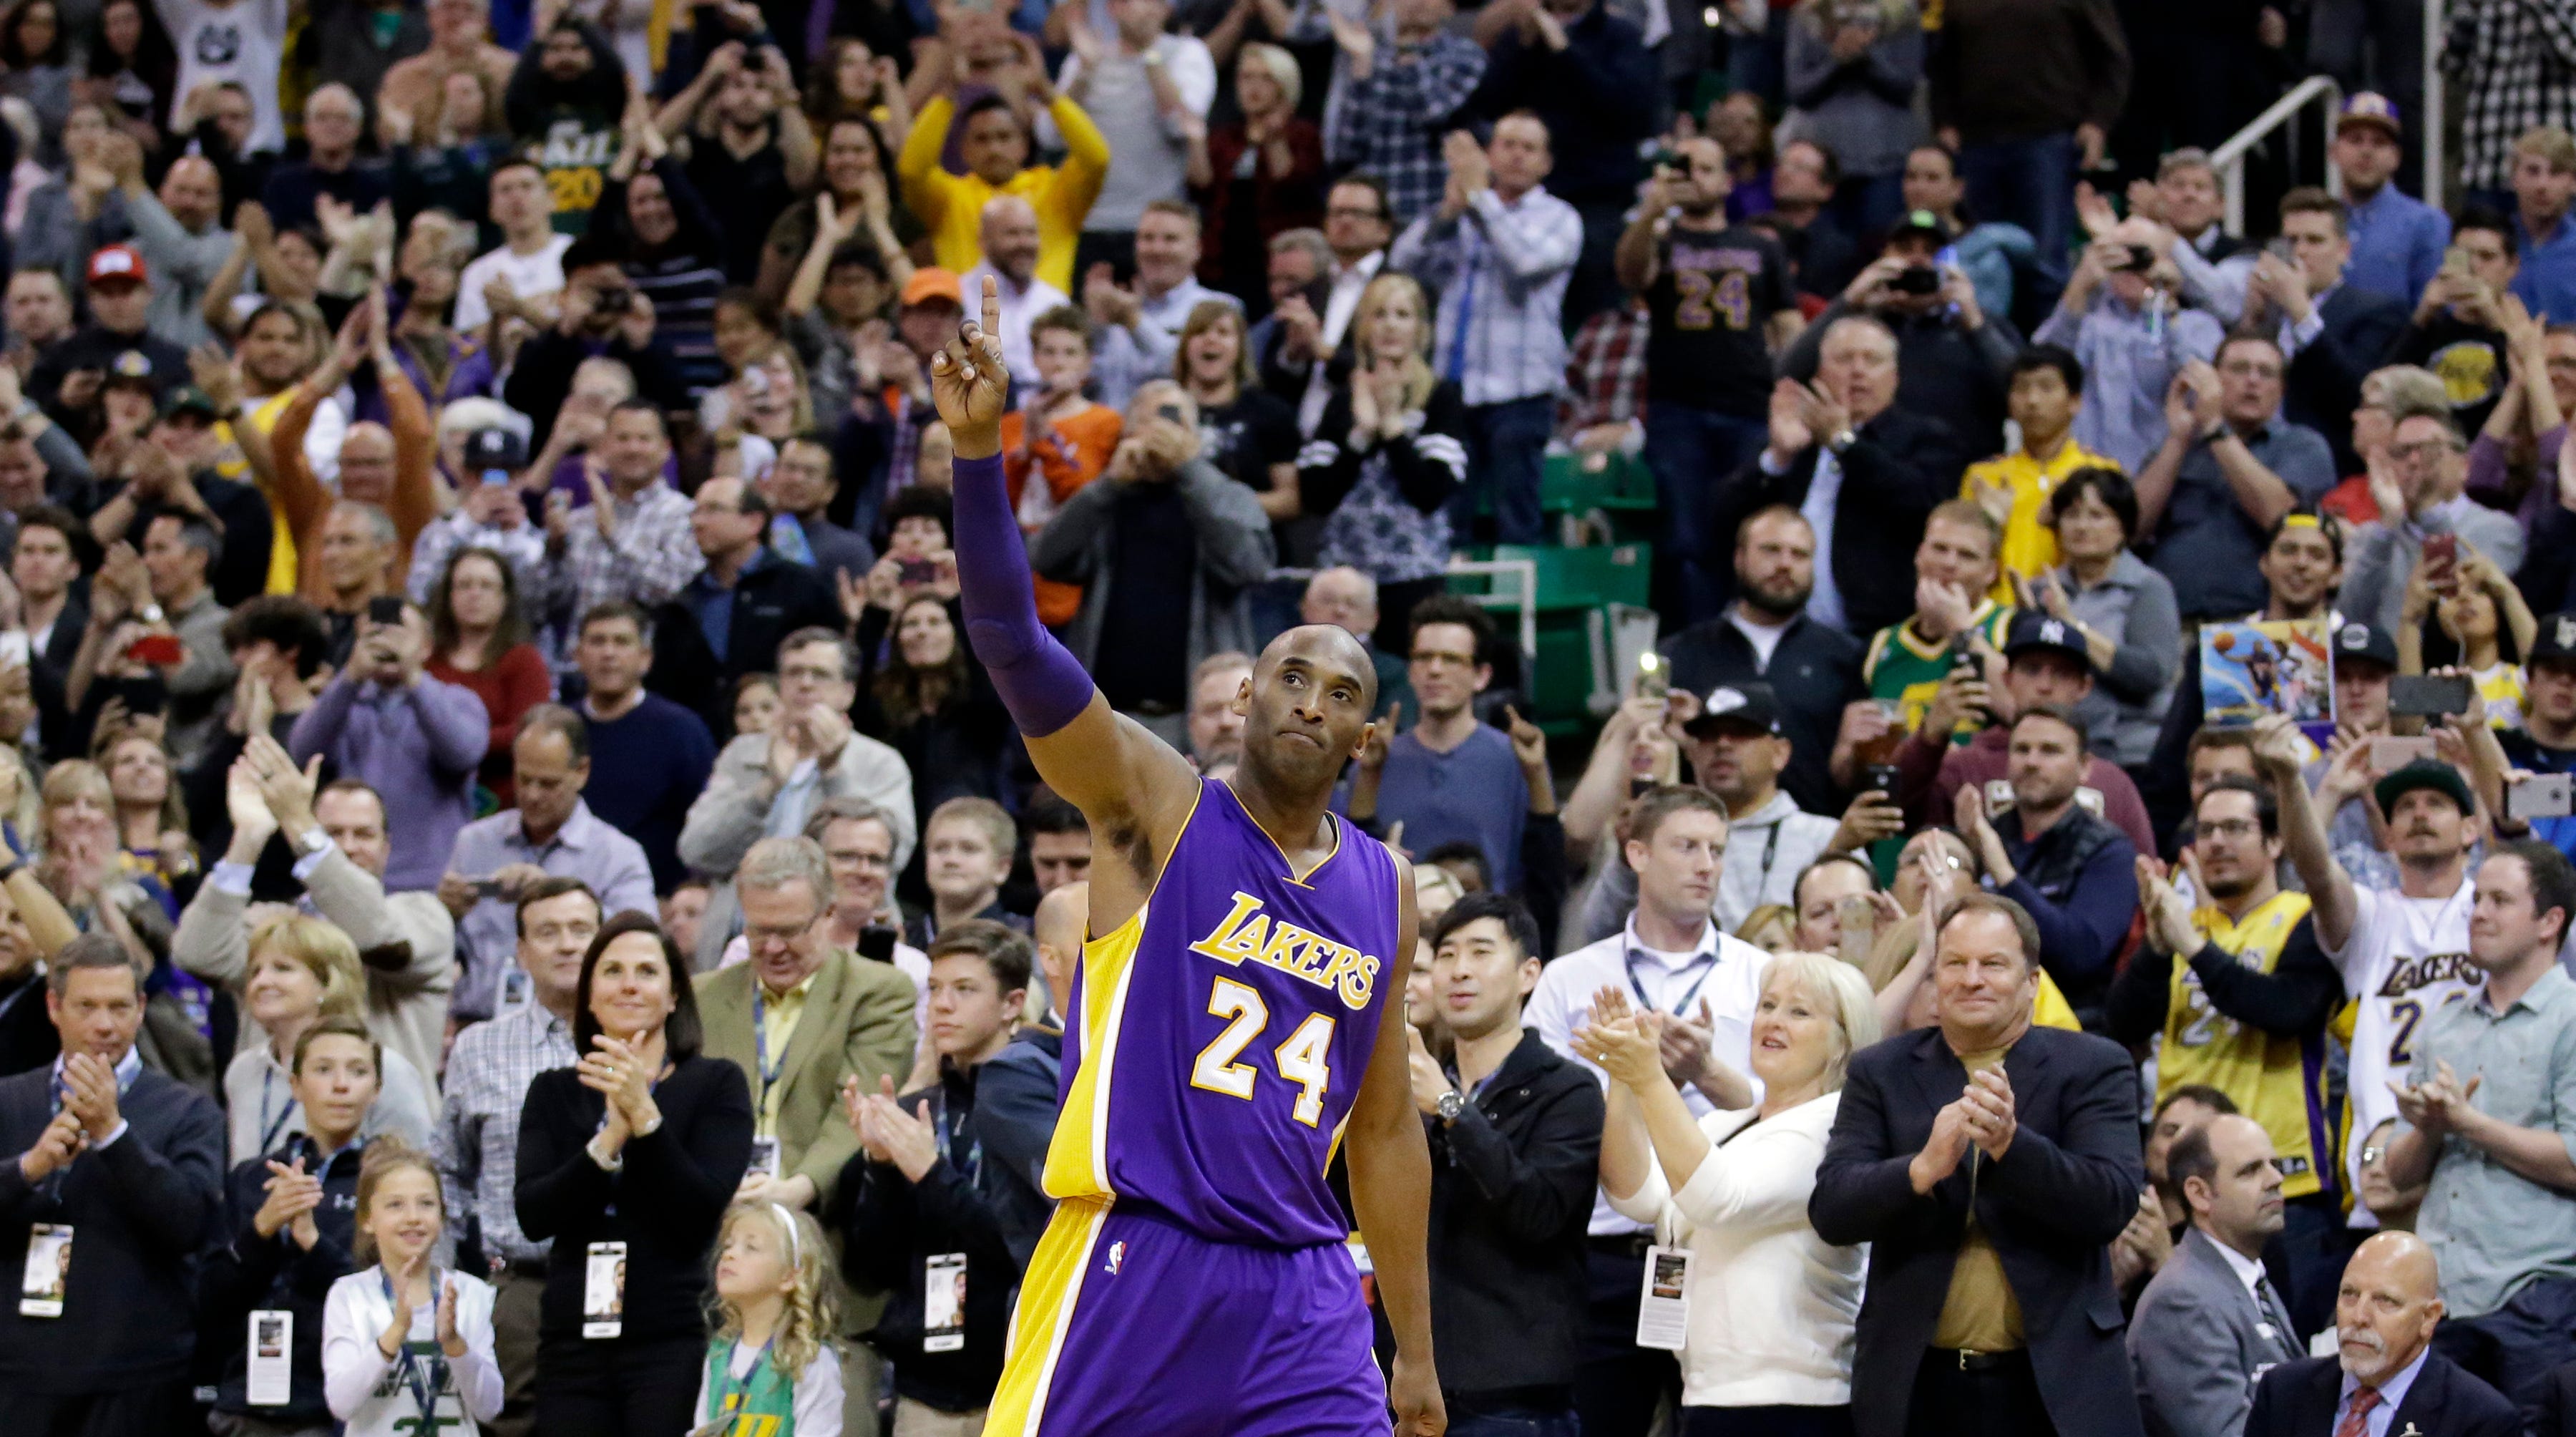 Kobe Bryant wavevs to the crowd after walking off the court in Salt Lake City in 2015.